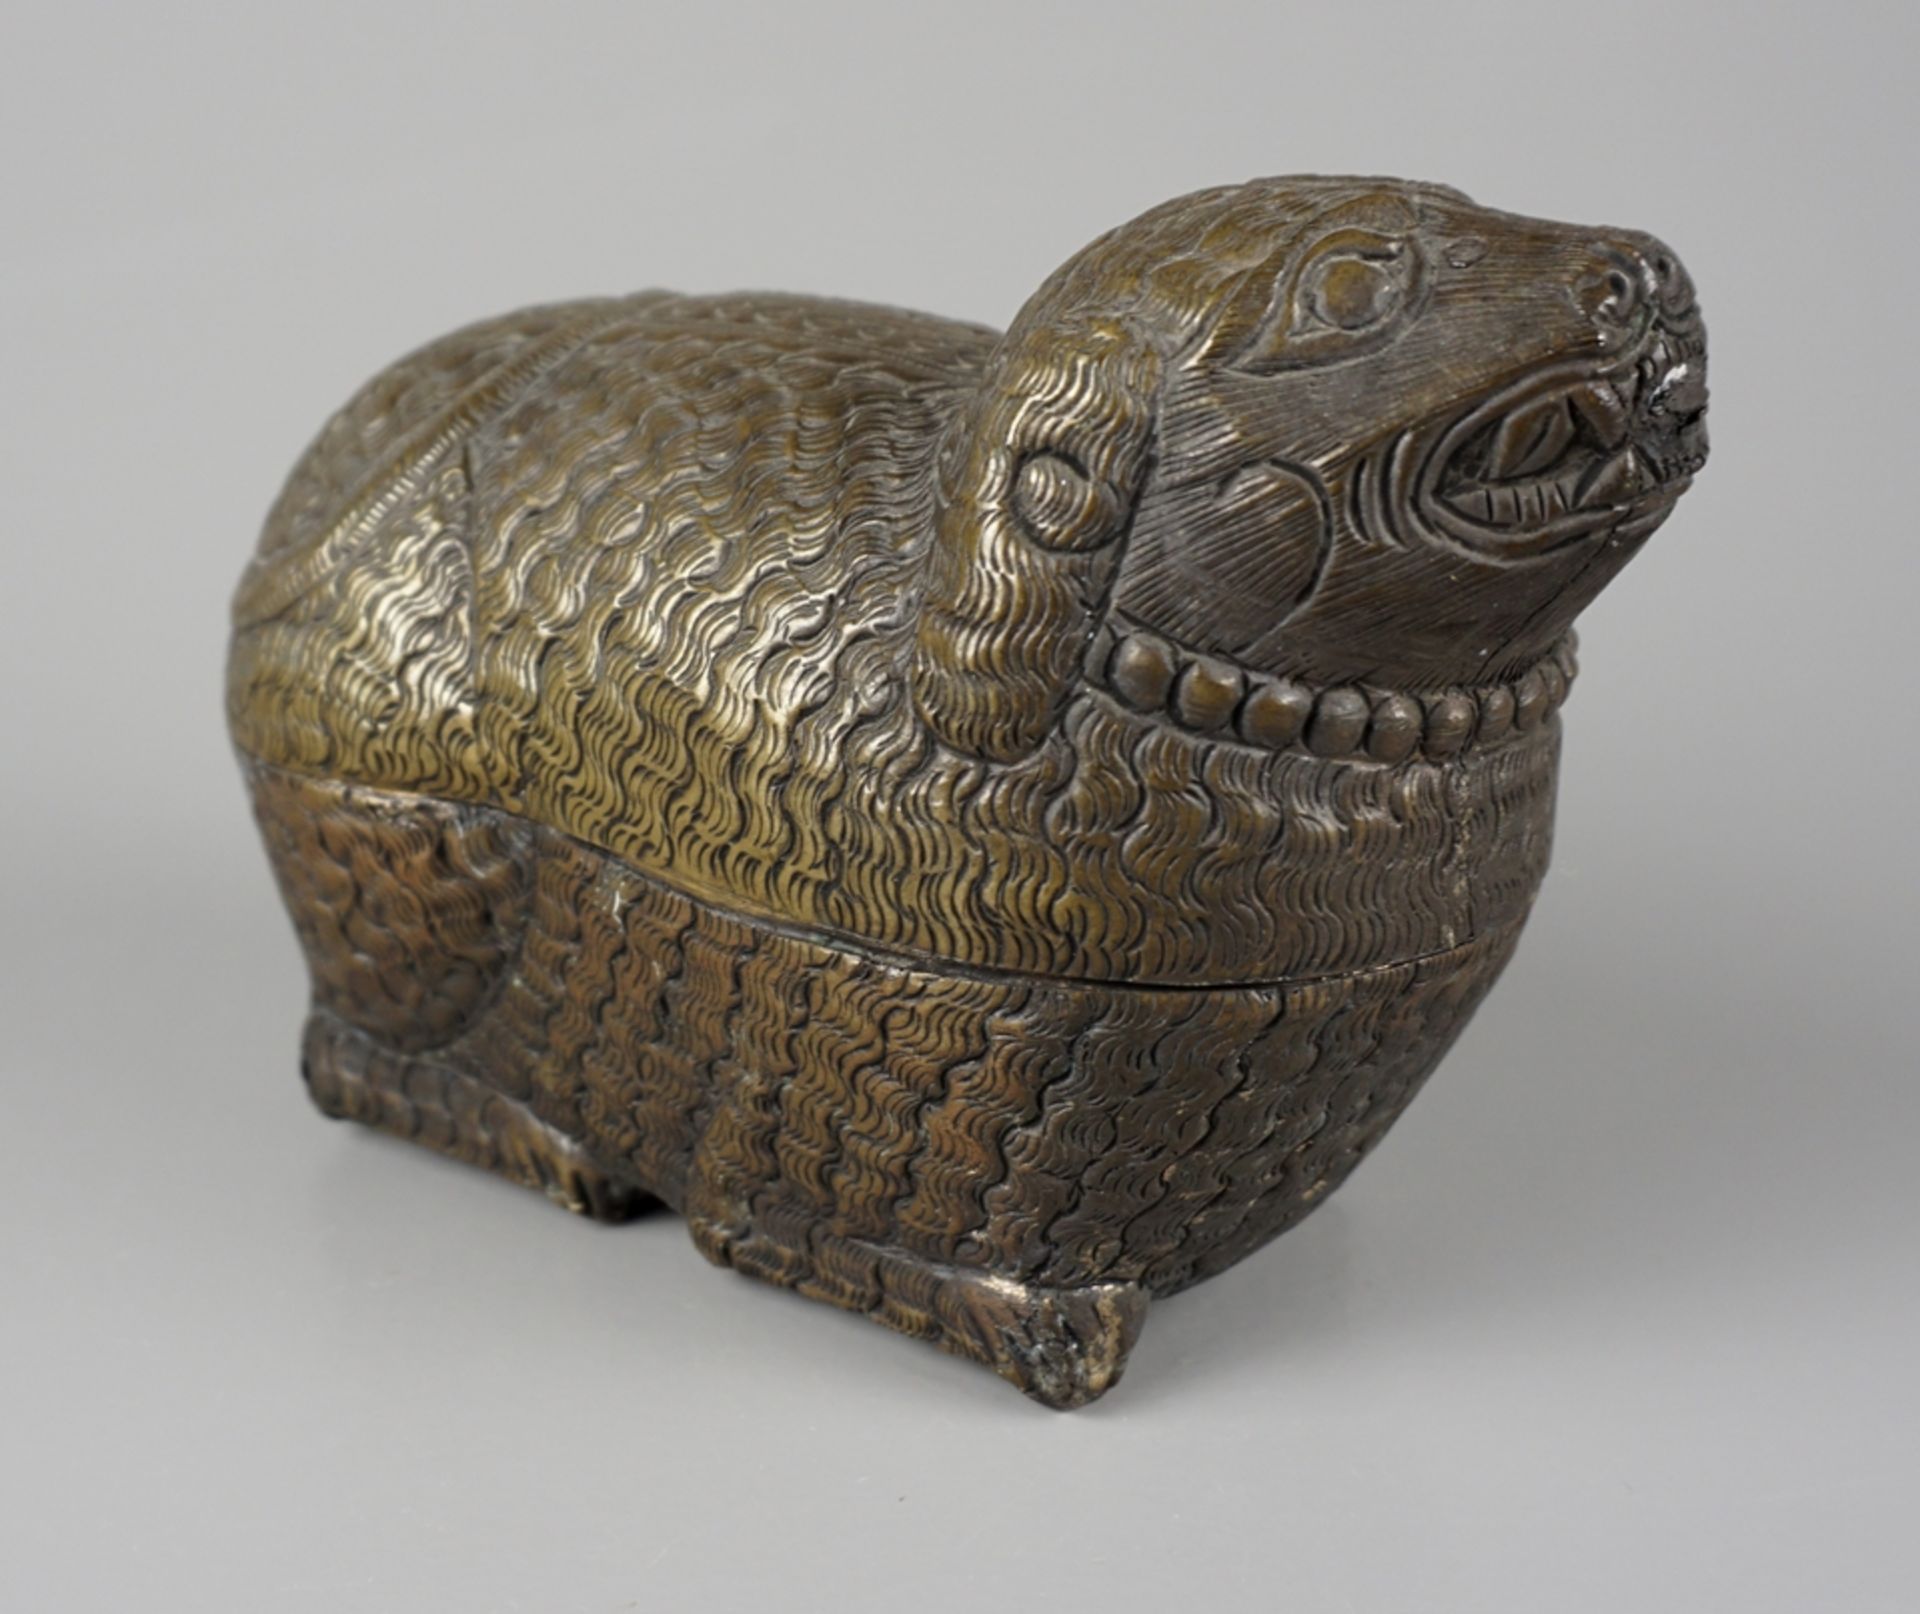 Figural betel nut box in the shape of a sheep, Cambodia - Image 2 of 4